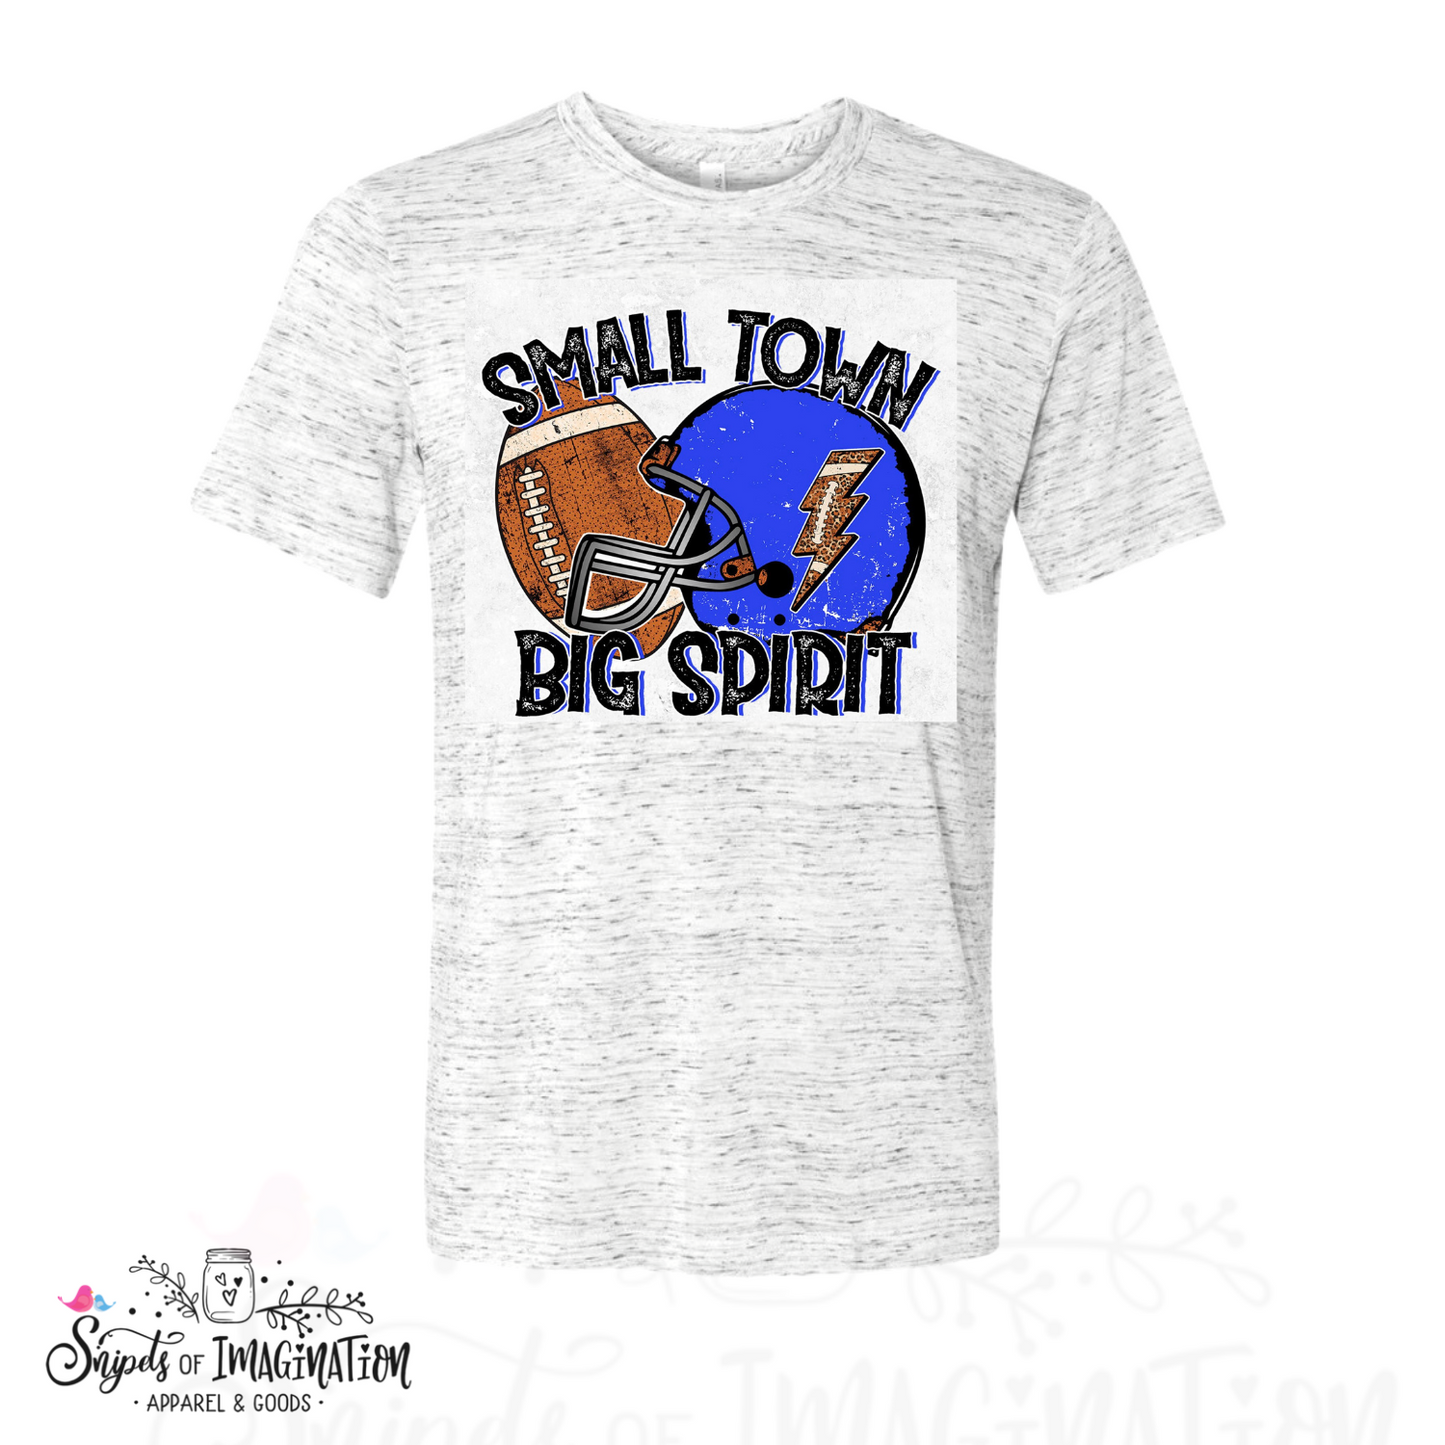 TShirt - Different Helmet Colors Available//Short Sleeve Soft White/Gray/Marble / Small Town Big Spirit Football//Team Color Football Helmet